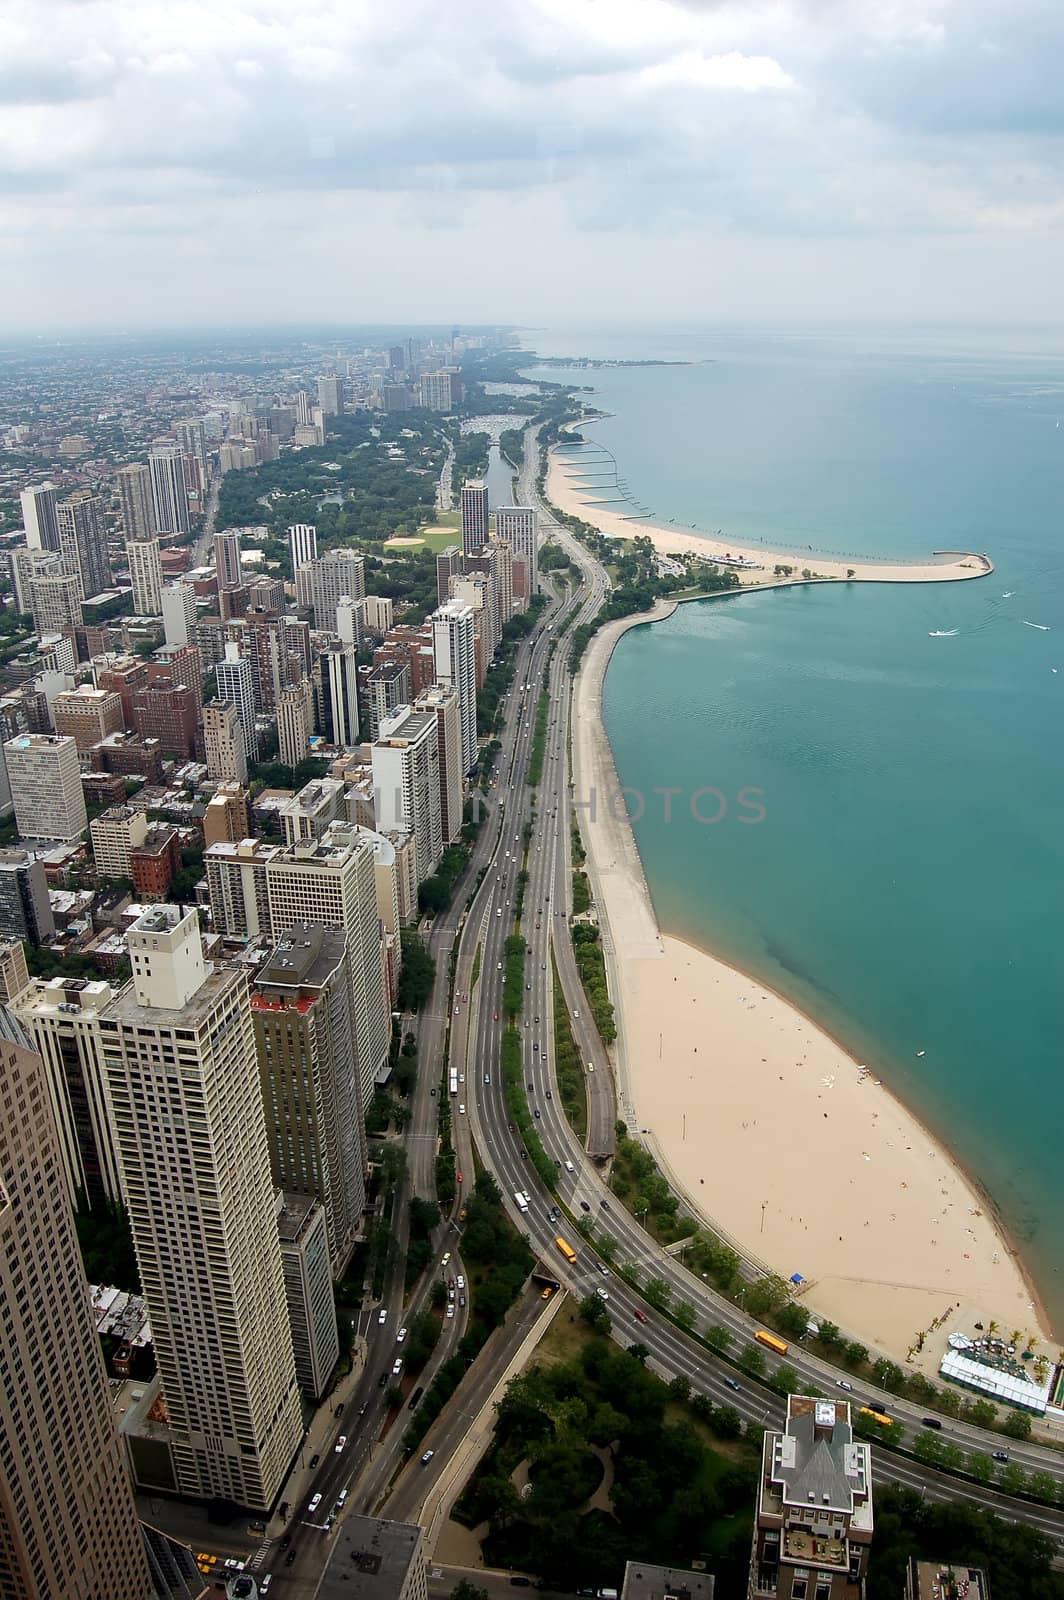 A view of Chicago looking north from the top of a skyscraper